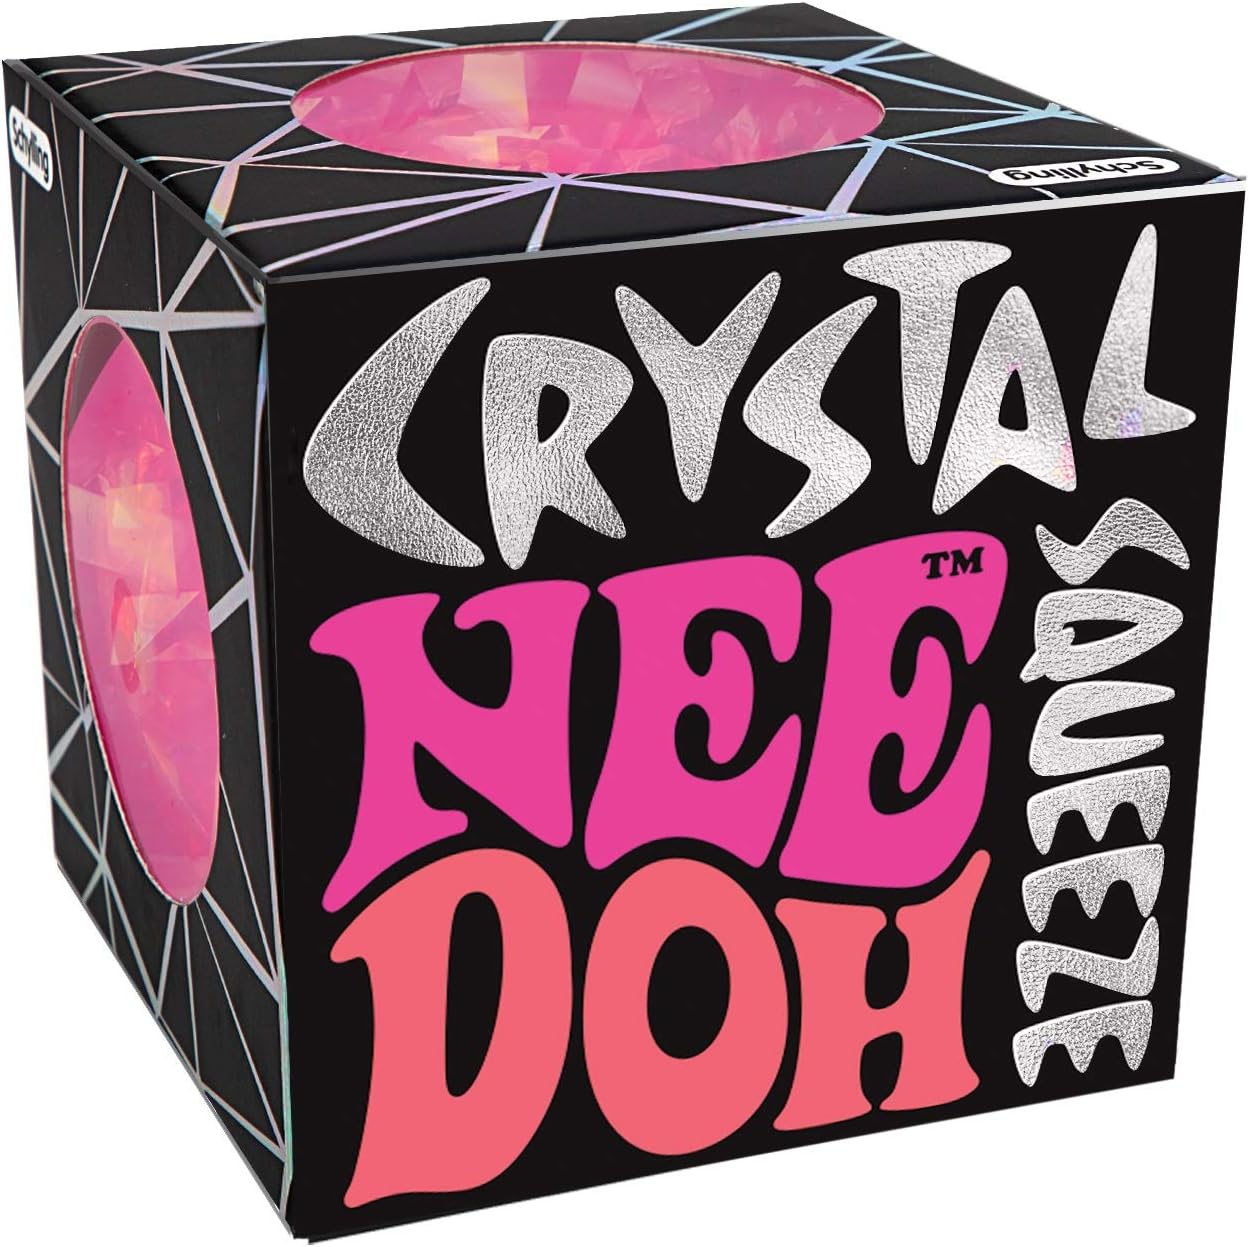 The product box for Crystal Nee Doh.